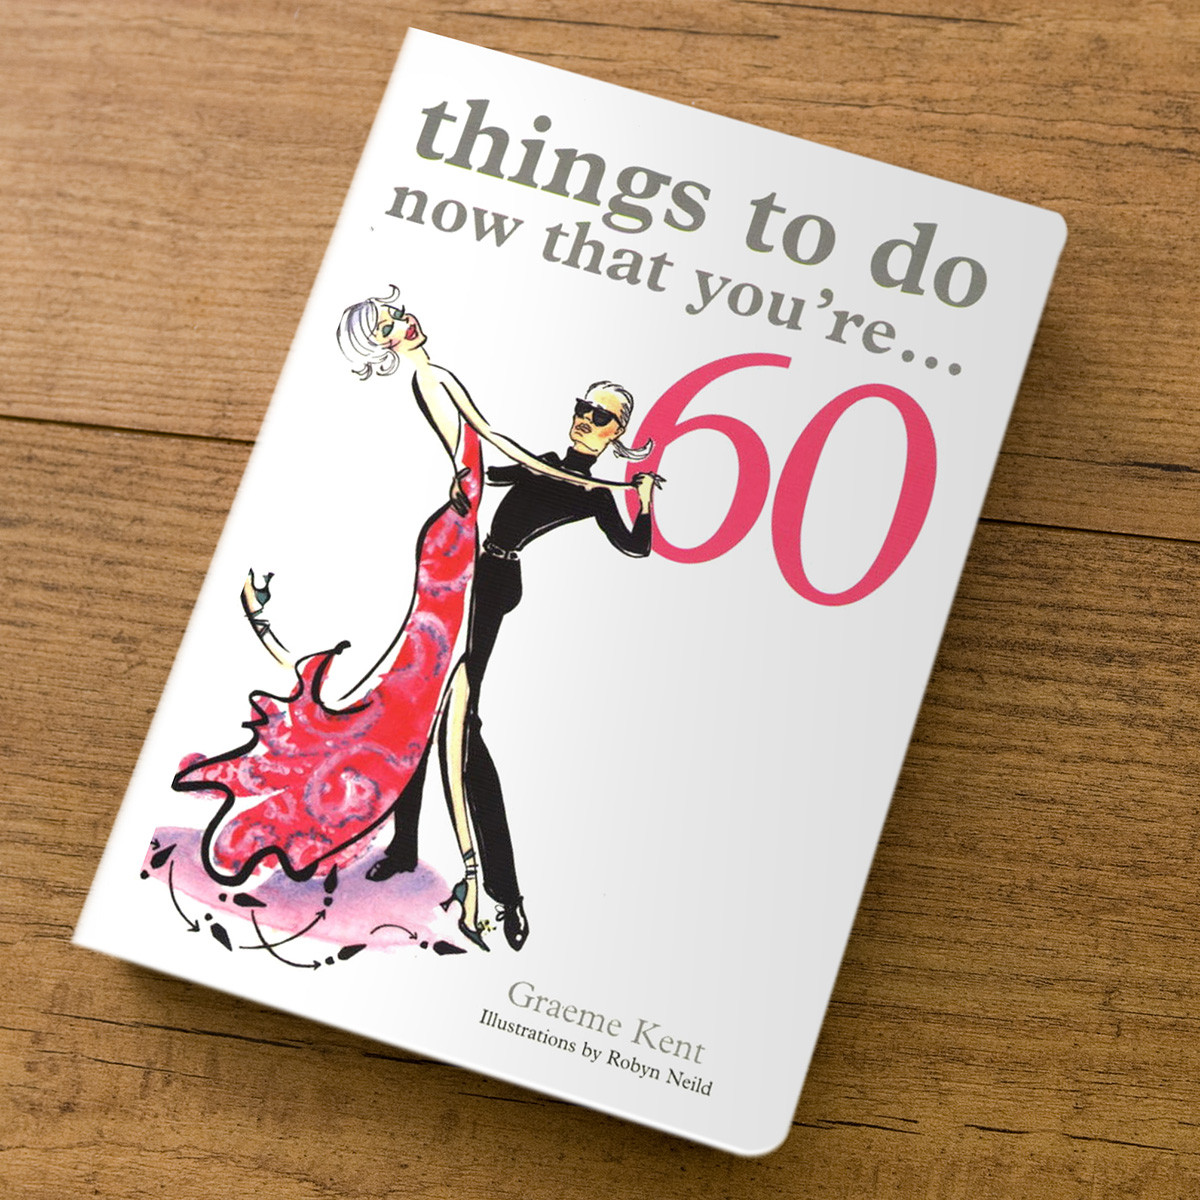 60Th Birthday Gift Ideas For.Women
 Things To Do Now That You re 60 Gift Book 60th